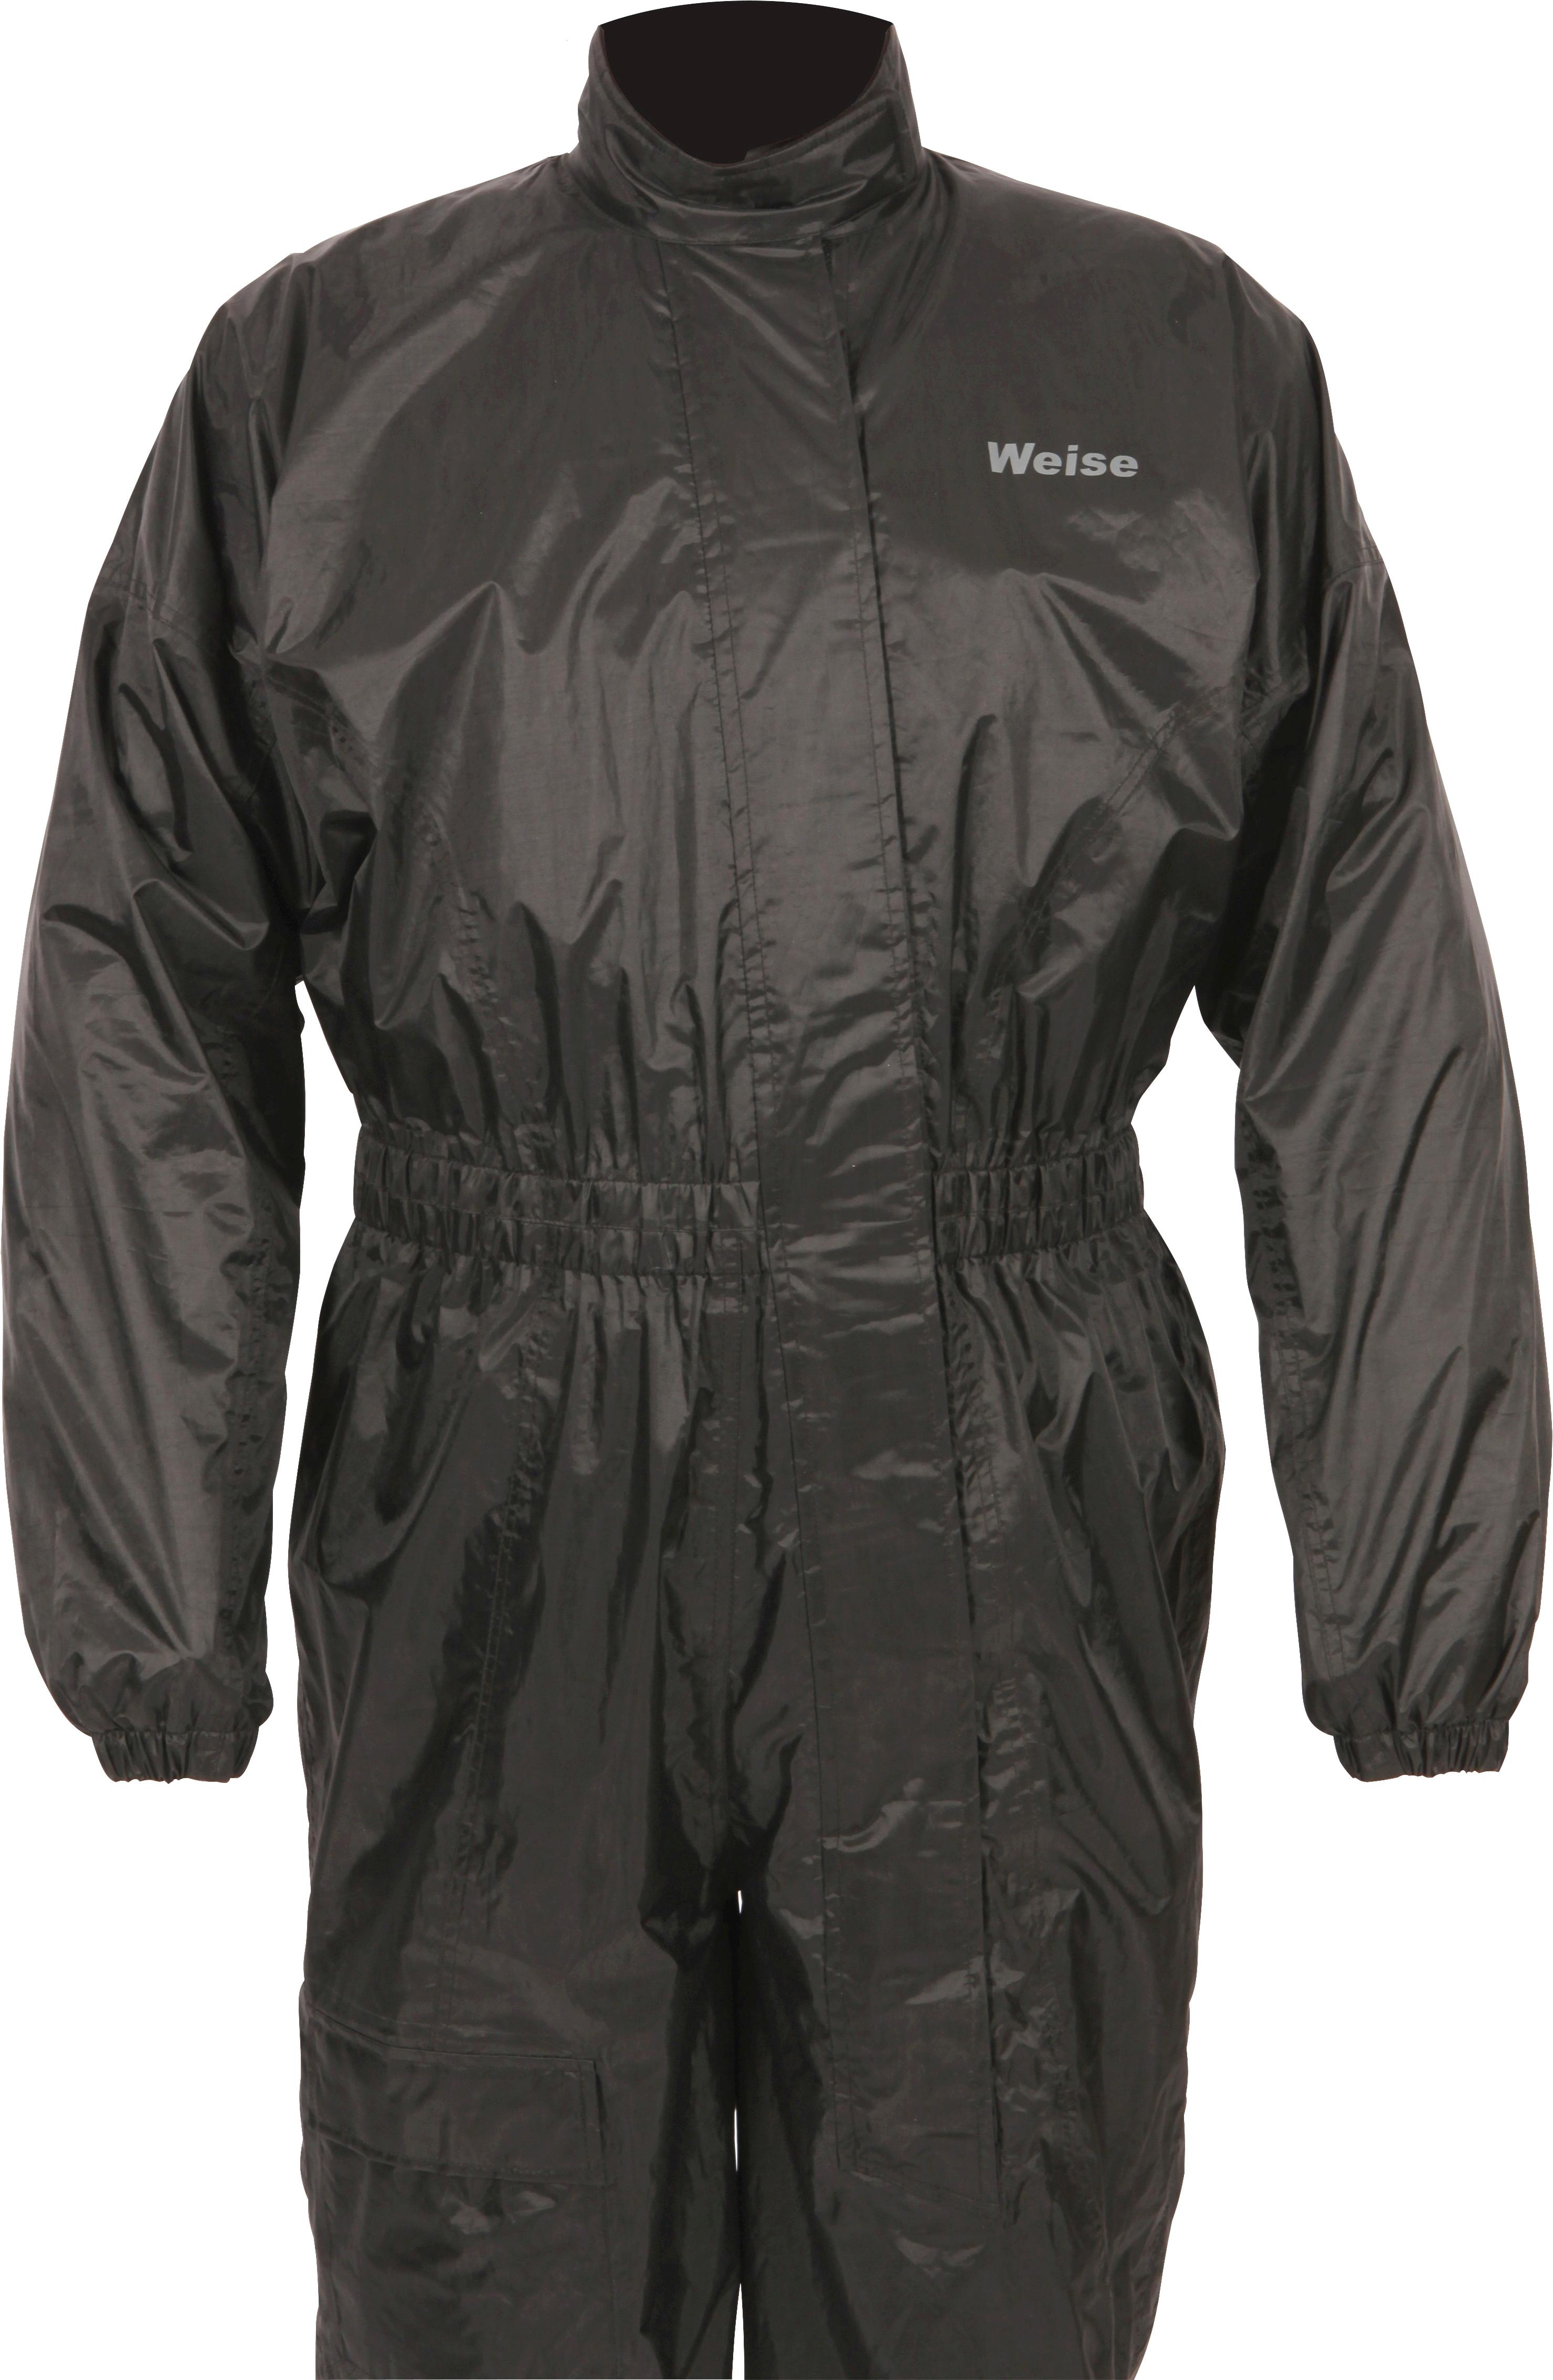 Weise Tempest Oversuit 2Xl